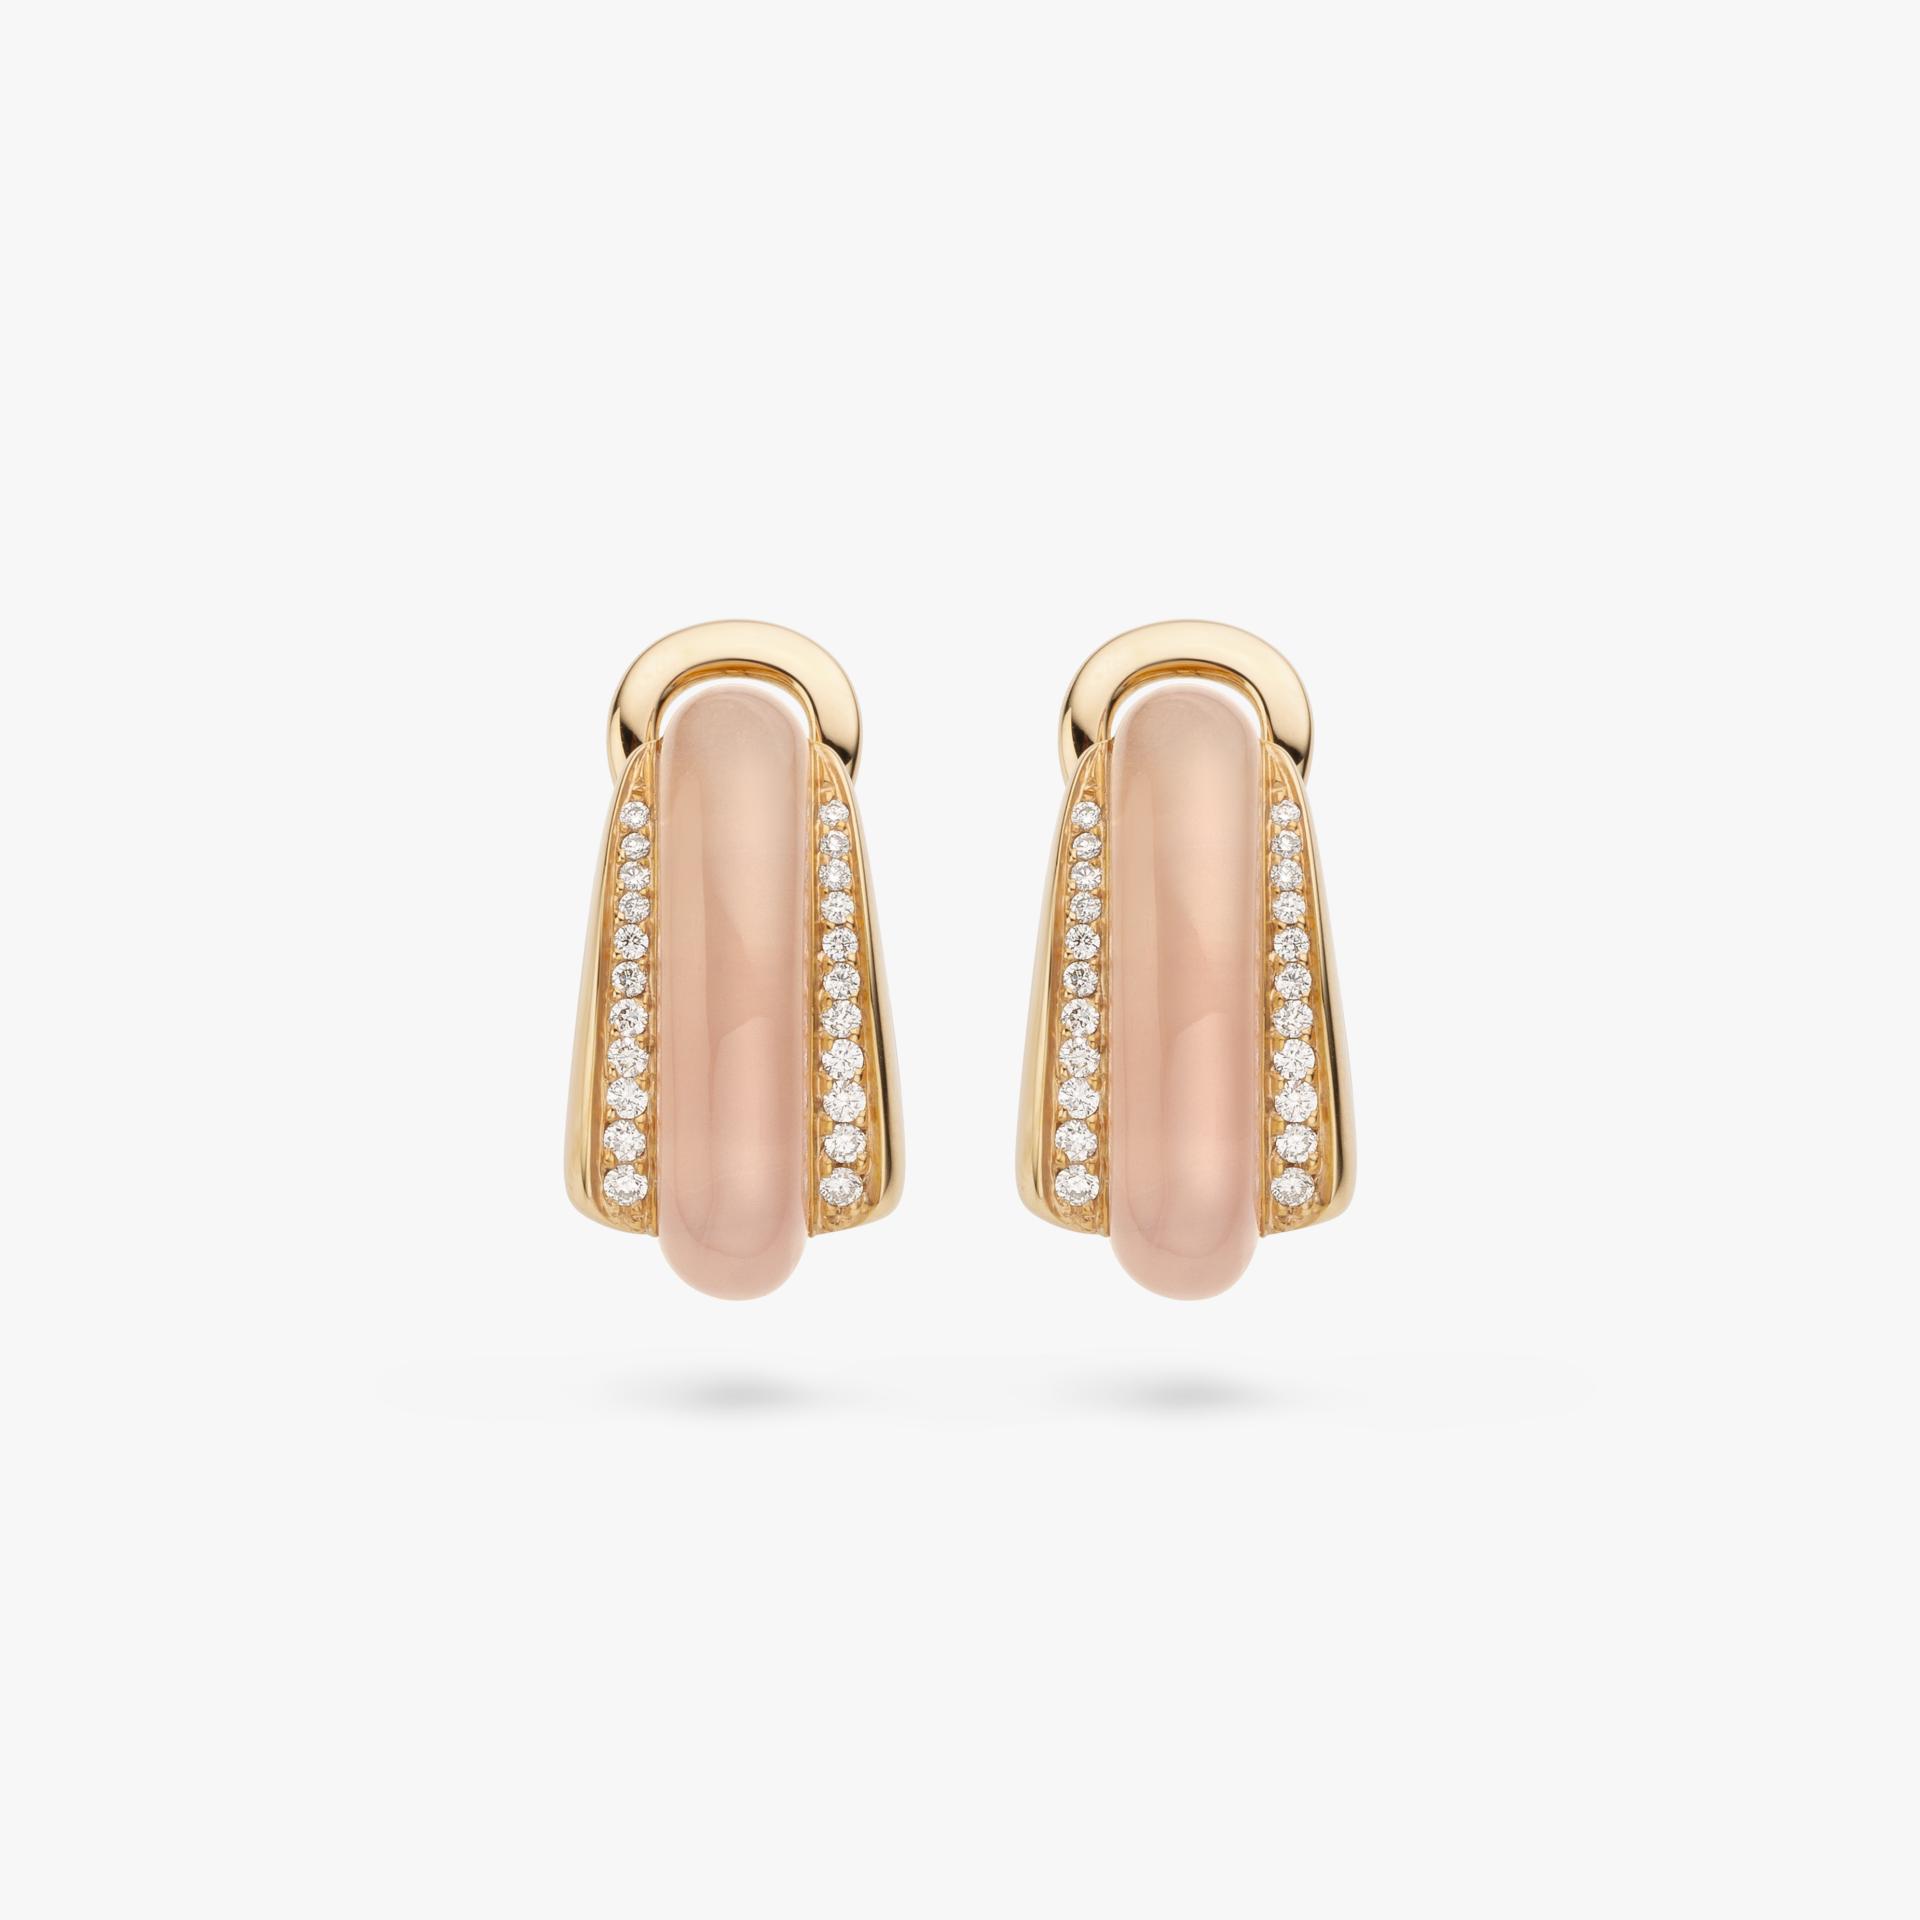 Rose gold earrings made by Maison De Greef